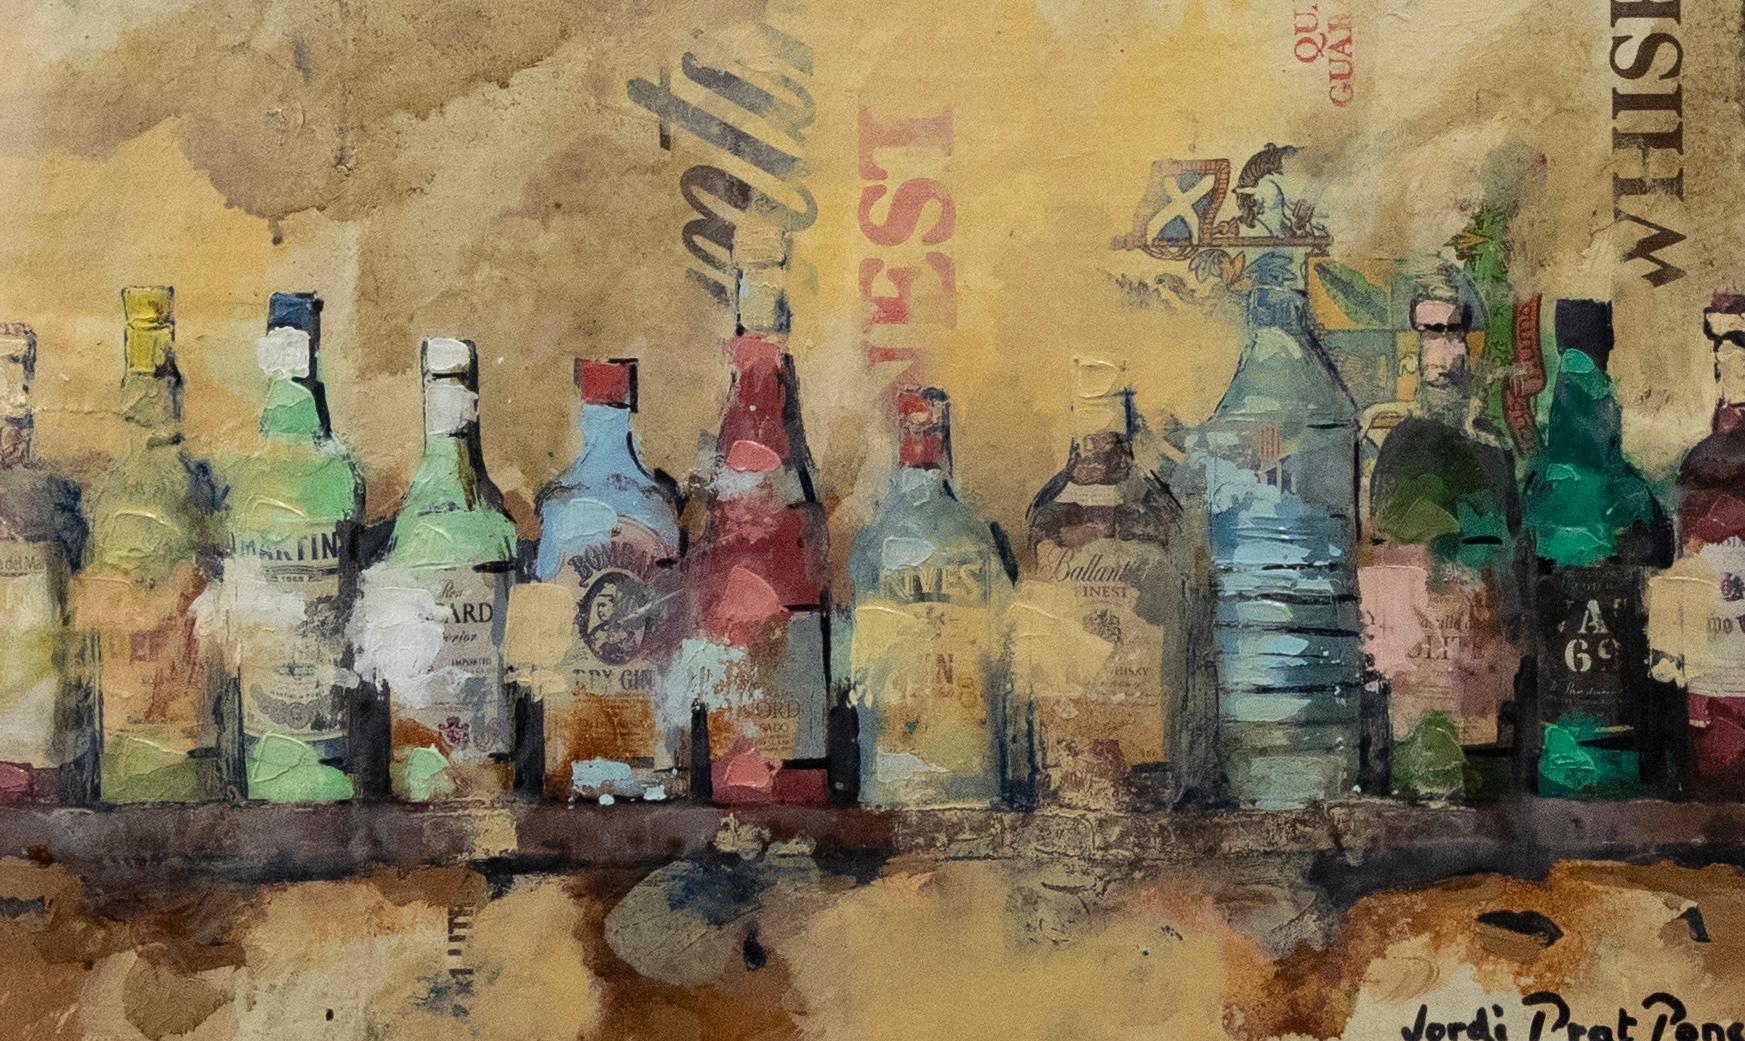 A quirky mix media study of spirit bottles on a shelf. Signed to the lower right 'Jordi Prat Pons'. Presented in a contemporary gilt-effect frame with a cream card mount. Fixed to the reverse of the frame is a signed certificate of authenticity and